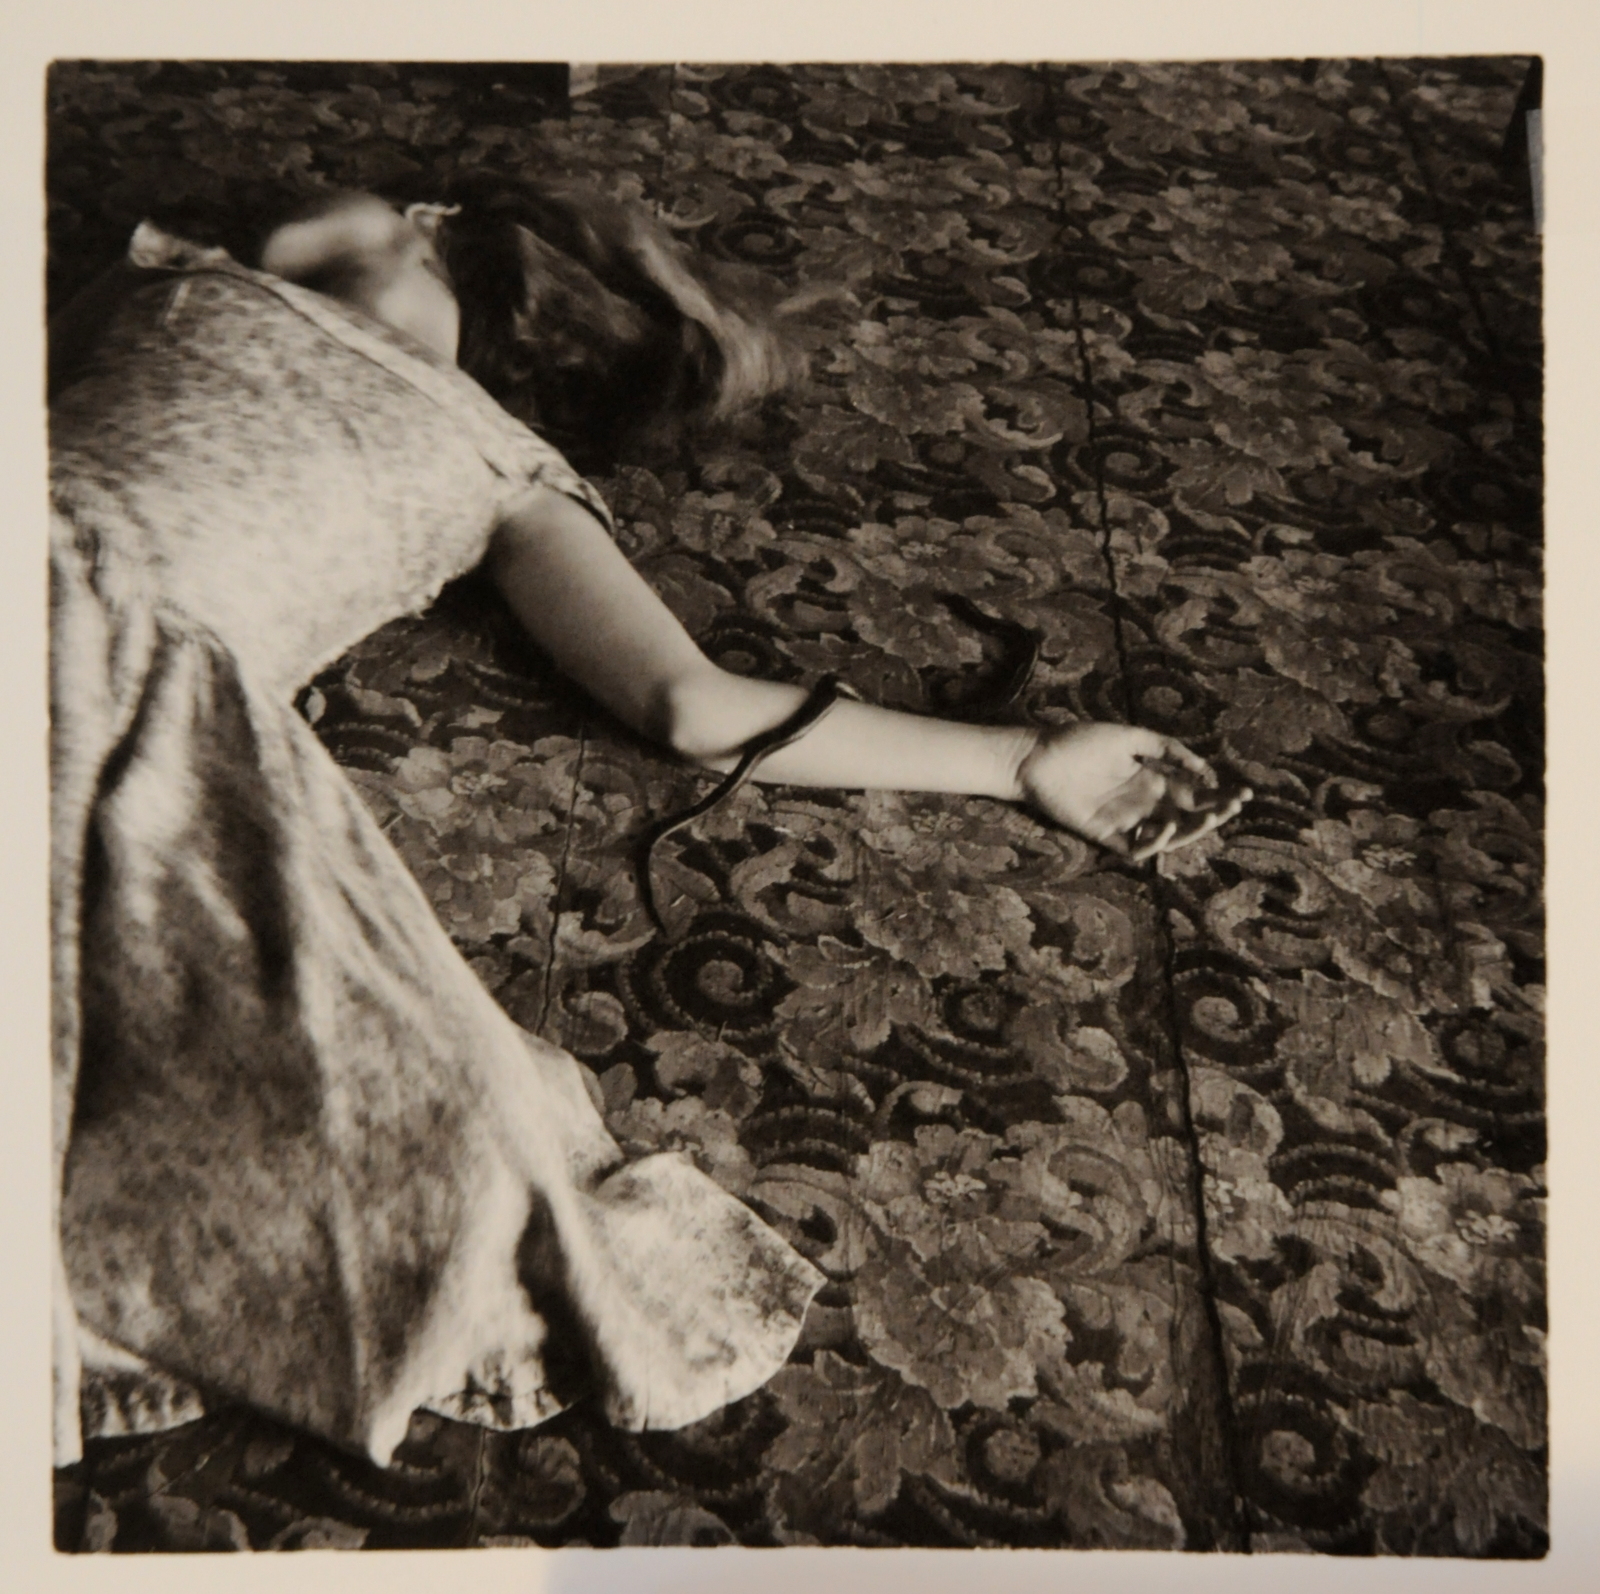 1989 diary image of 20-year-old Vanessa Blaylock lying, face up but turned to the side, spread out in a flowing dress, on a carpeted floor with a small snake crawling across her elbow